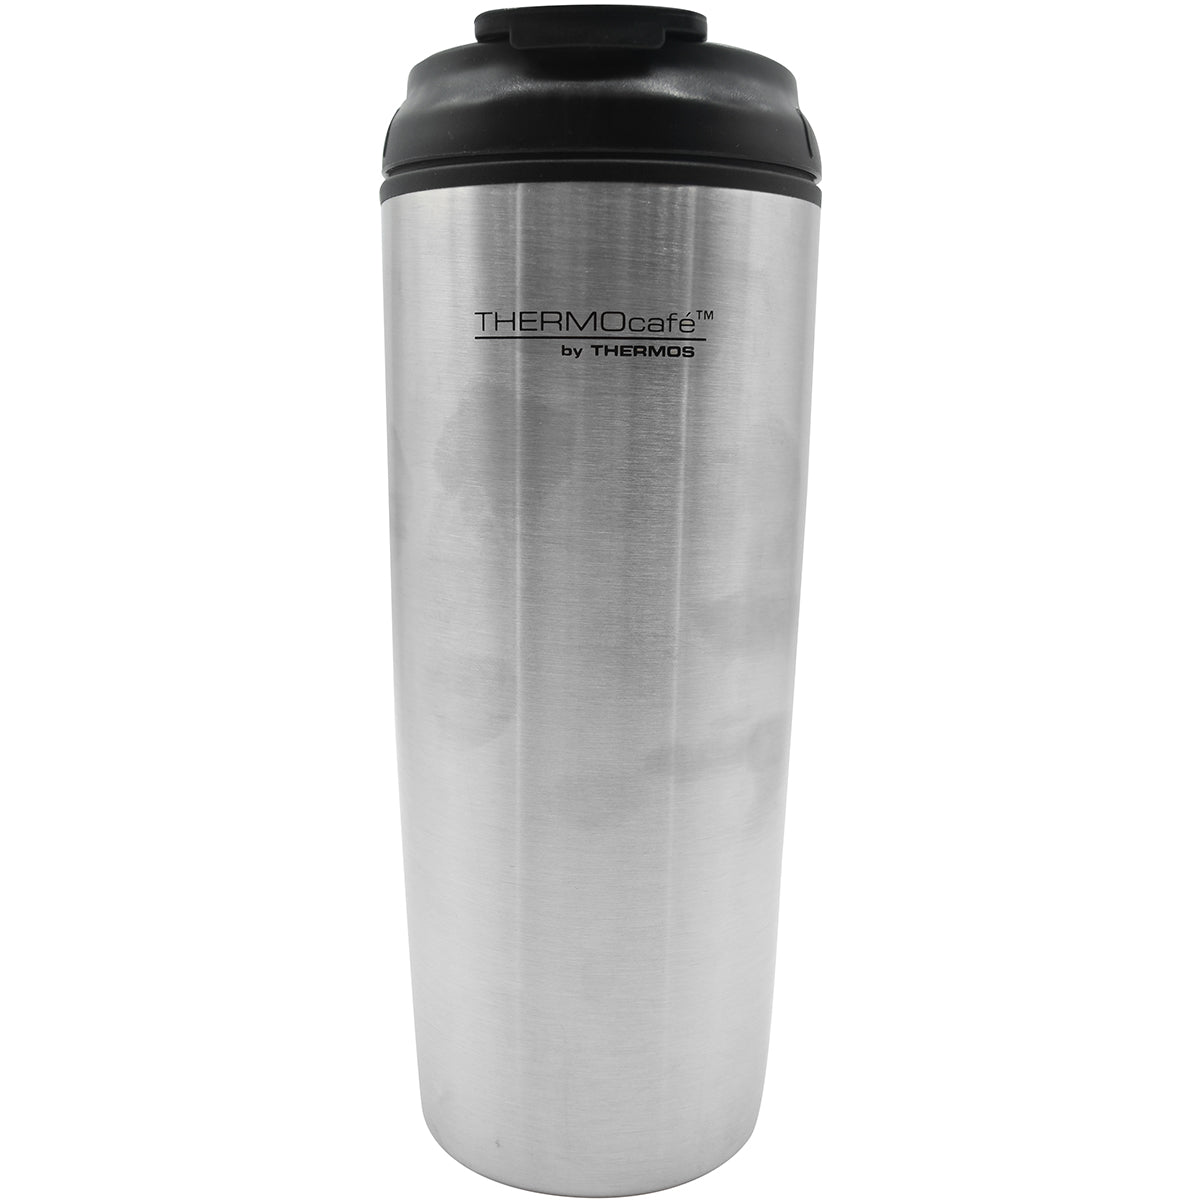 Thermos 16 oz. ThermoCafe Insulated Stainless Steel Travel Tumbler Thermos